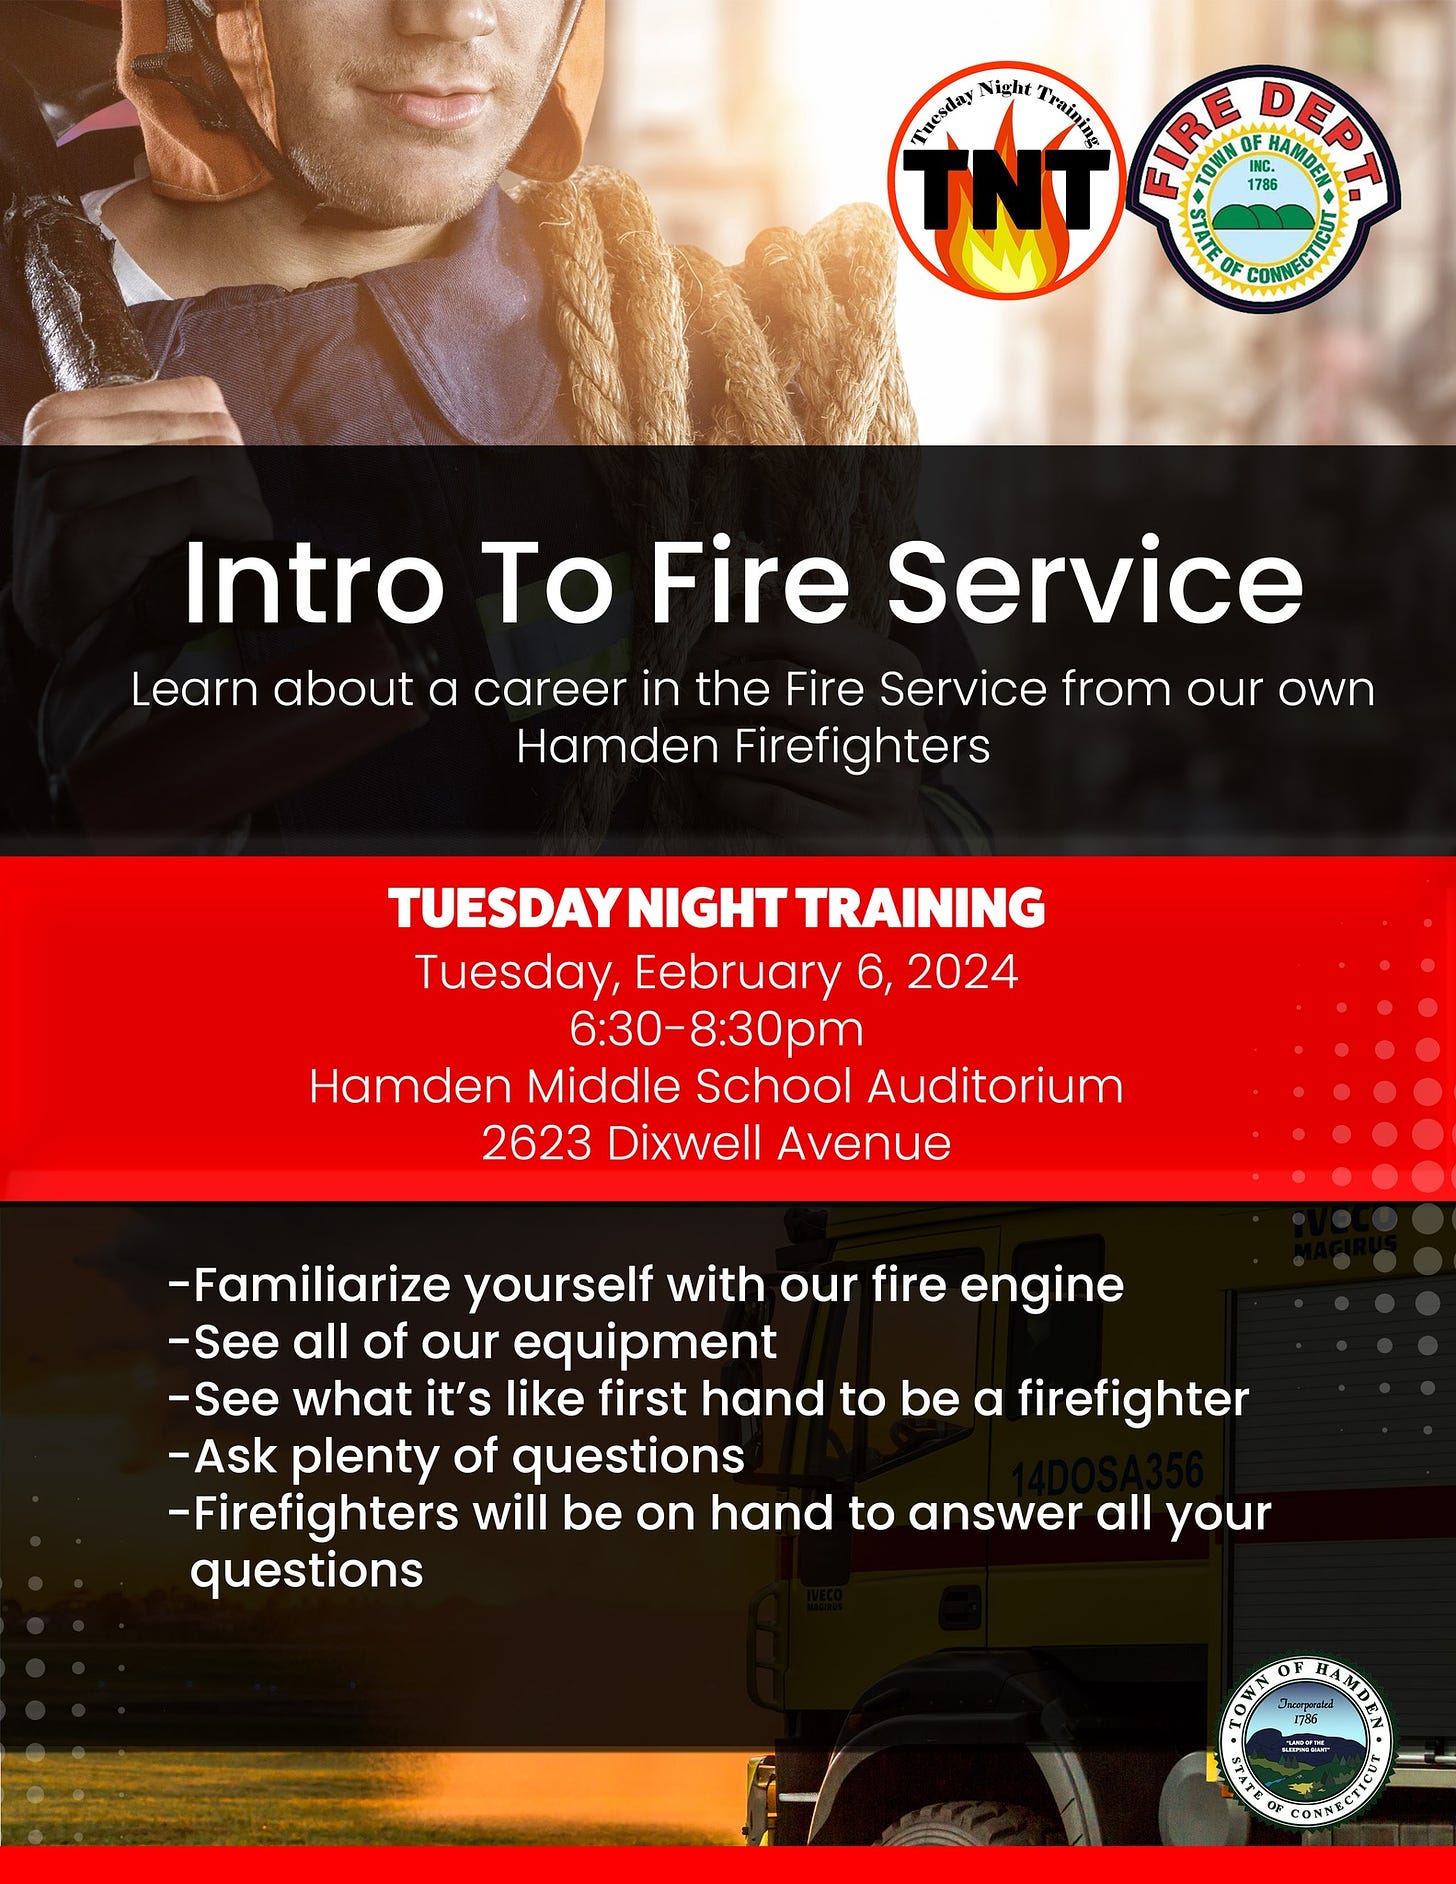 May be an image of 1 persónur, eldur og Tekstur, ið sigur "Tresday Night Trolinin DERE Intro To Fire Service Learn about a career in the Fire Service from our own Hamden Firefighters TUESDAYNIGHT TRAINING Tuesday, Eebruary ,6, 2024 30-8:30pm Hamden Middle School Auditorium 2623 Dixwell Avenue -Familiarize yourself with our fire engine -See all of our equipment -See what it's like first hand to be a firefighter -Ask plenty of questions -Firefighters will be on hand to answer all your questions"